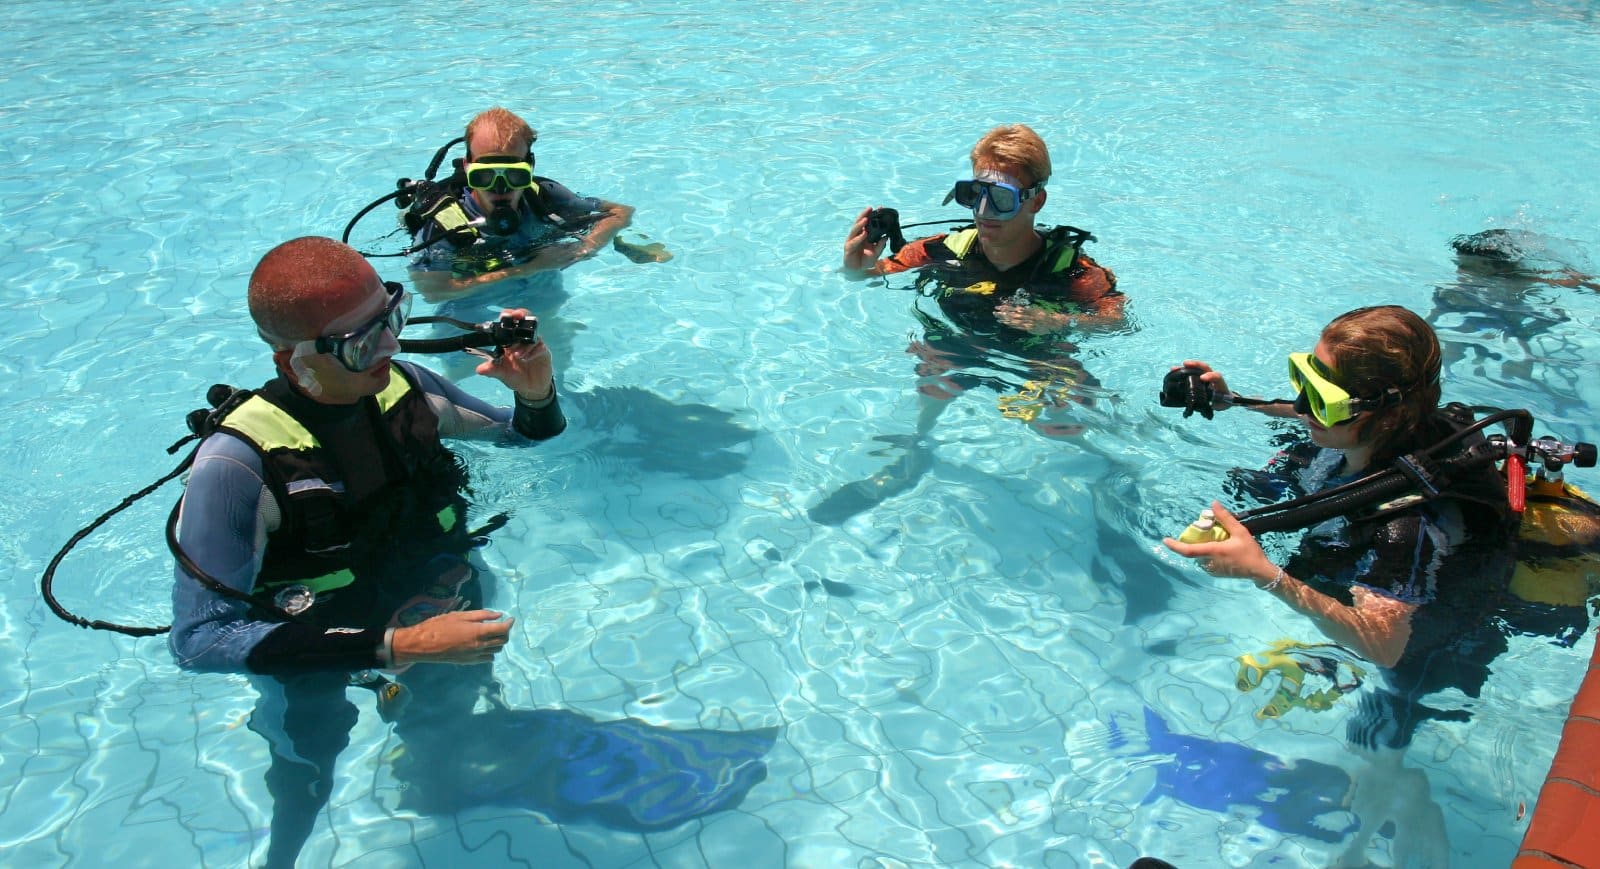 <p class="wp-caption-text">Image Credit: Shutterstock / tramper79</p>  <p><span>Taking the initial plunge and grasping the basics of scuba diving is crucial. This includes familiarizing yourself with the equipment, understanding pressure changes, learning about buoyancy control, and mastering breathing underwater. A certified course from organizations like PADI or NAUI provides comprehensive training, covering theoretical knowledge and practical skills in a controlled environment, ensuring divers are well-prepared for their first open-water dive.</span></p> <p><b>Insider’s Tip:</b><span> Start with a ‘Discover Scuba Diving’ experience if you’re unsure about committing to a full certification course. This introductory dive allows you to learn basic concepts and skills under the direct supervision of a professional, giving you a taste of what scuba diving offers without the full commitment.</span></p>